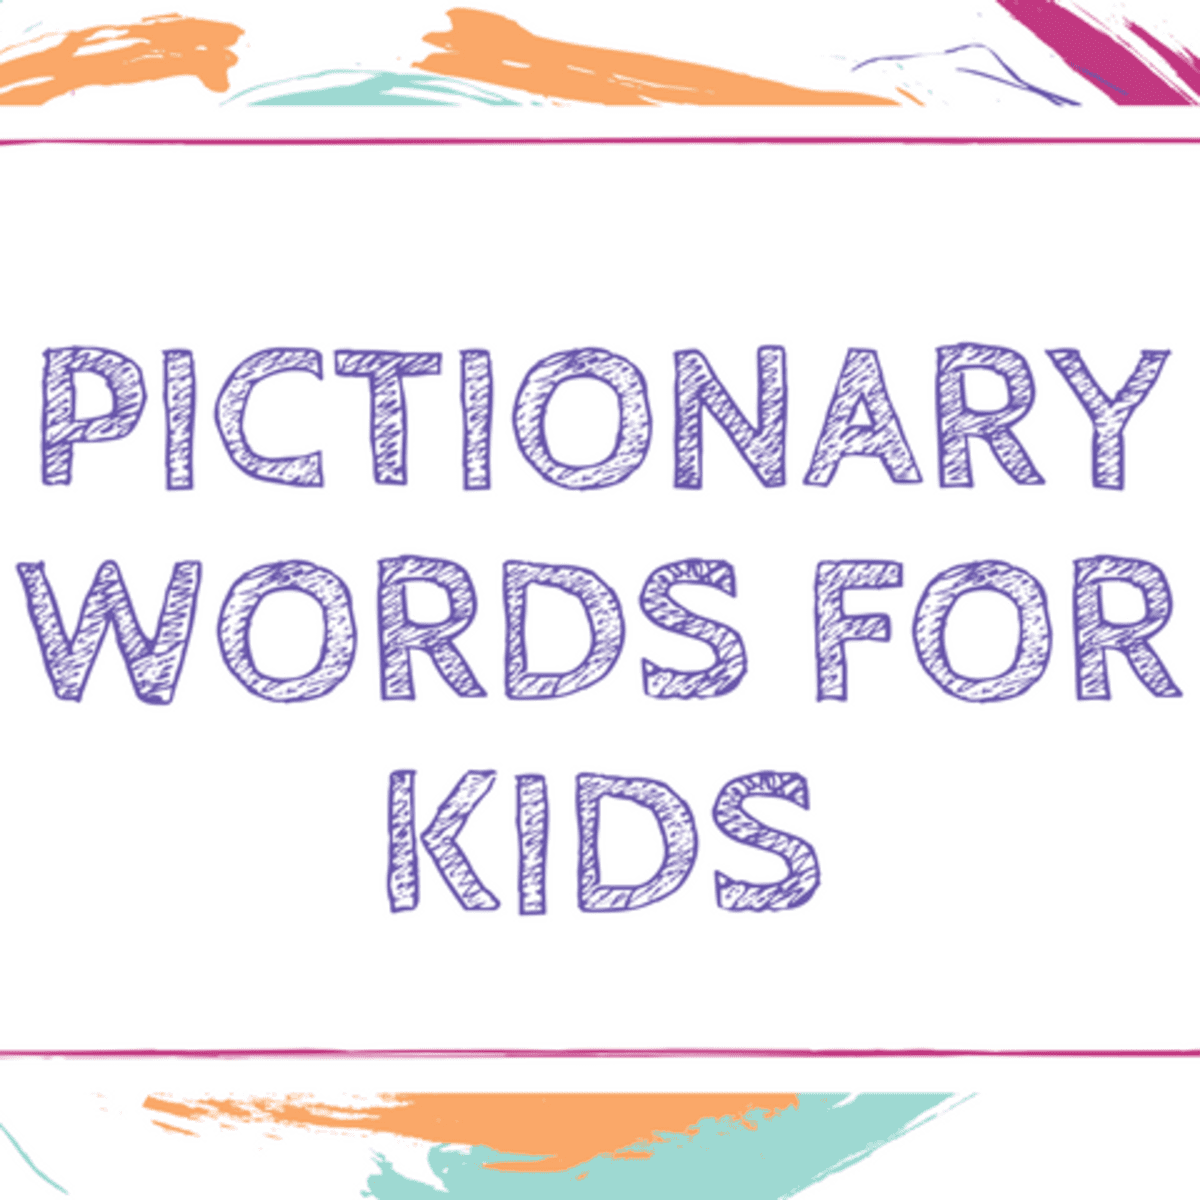 300+ Pictionary Word Ideas for Kids - WeHaveKids